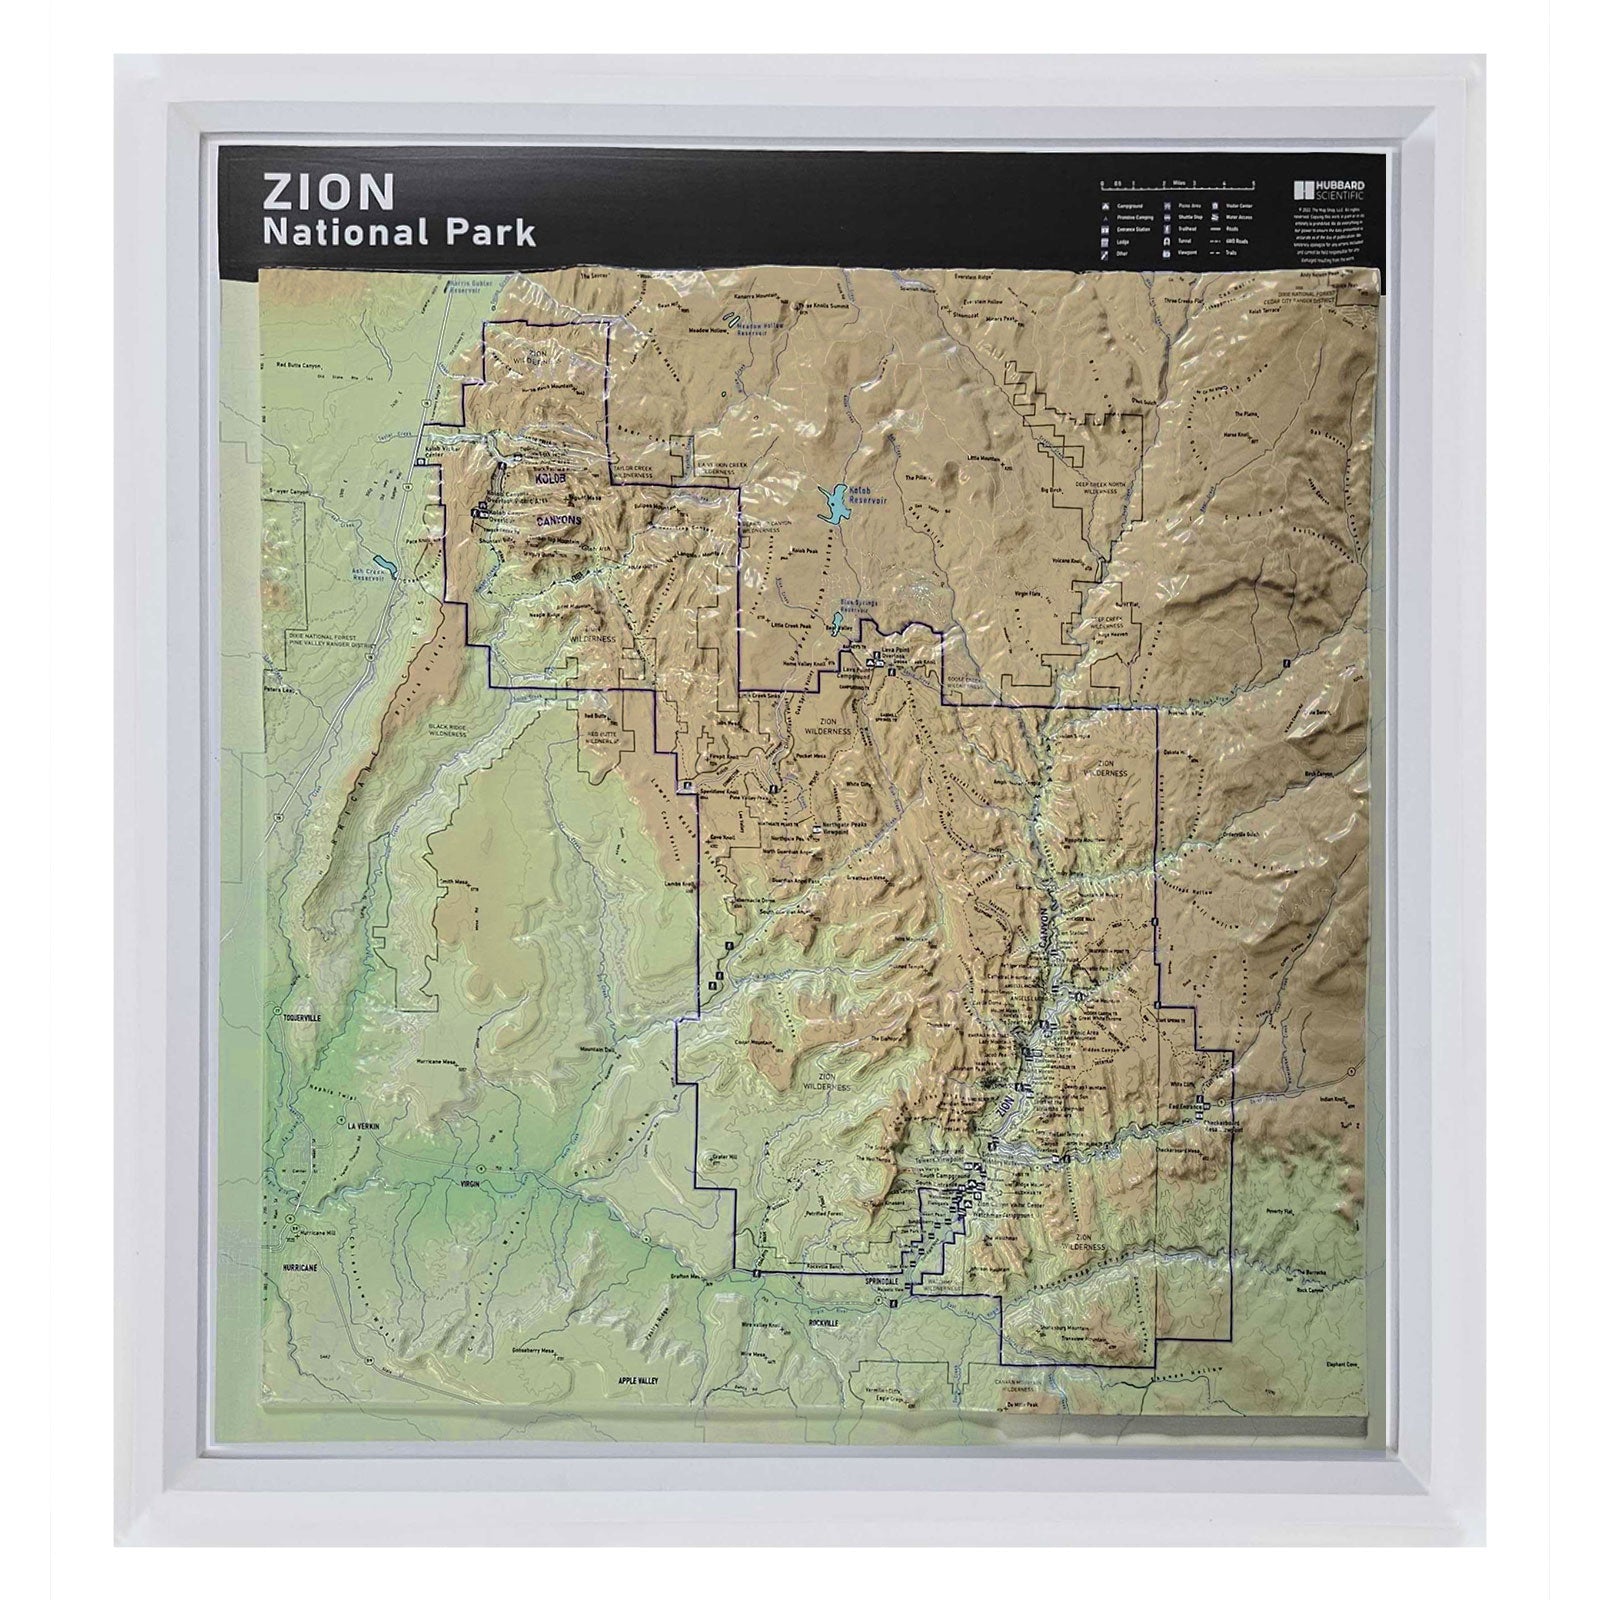 Three-dimensional (3D) raised relief map of Zion National Park, Utah, showcasing The Narrows, Angels Landing, Emerald Pools, and Kolob Canyons in detail. The map highlights the park's towering cliffs, deep canyons, rivers, and diverse ecological zones.